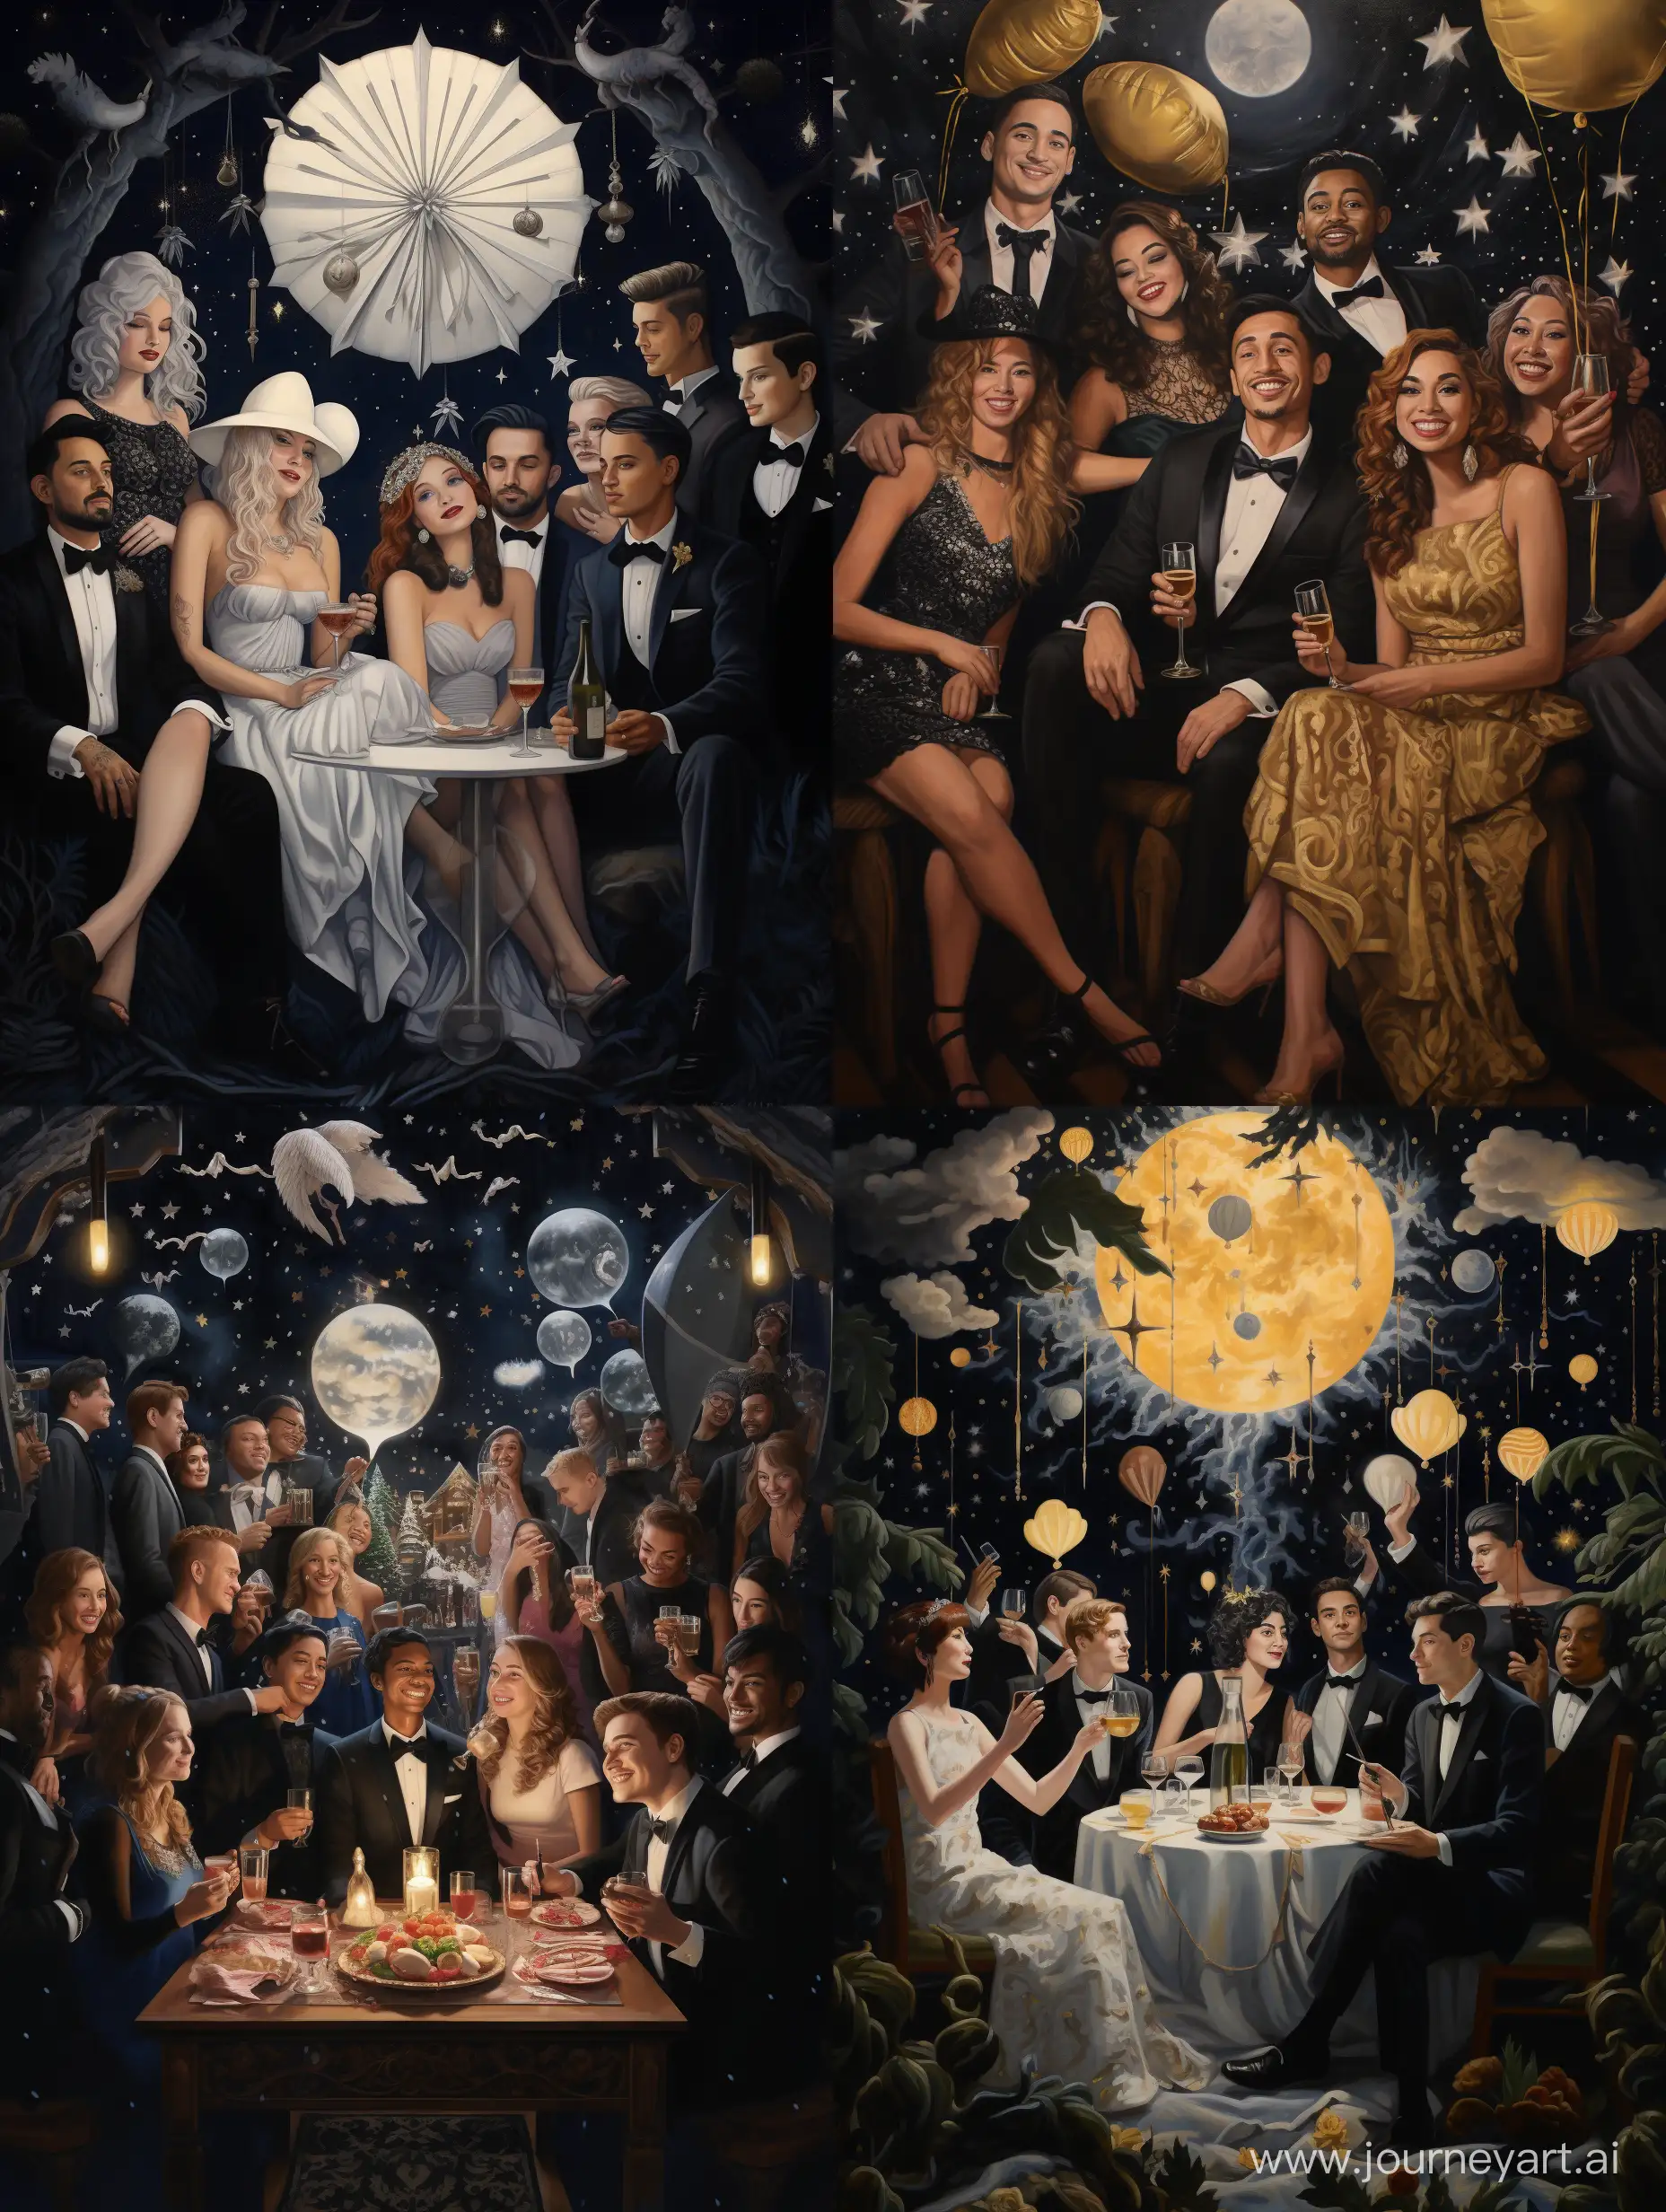  A diverse group of kind-hearted individuals, each with their own unique style and personality, coming together to ring in the New Year on a moonlit night.